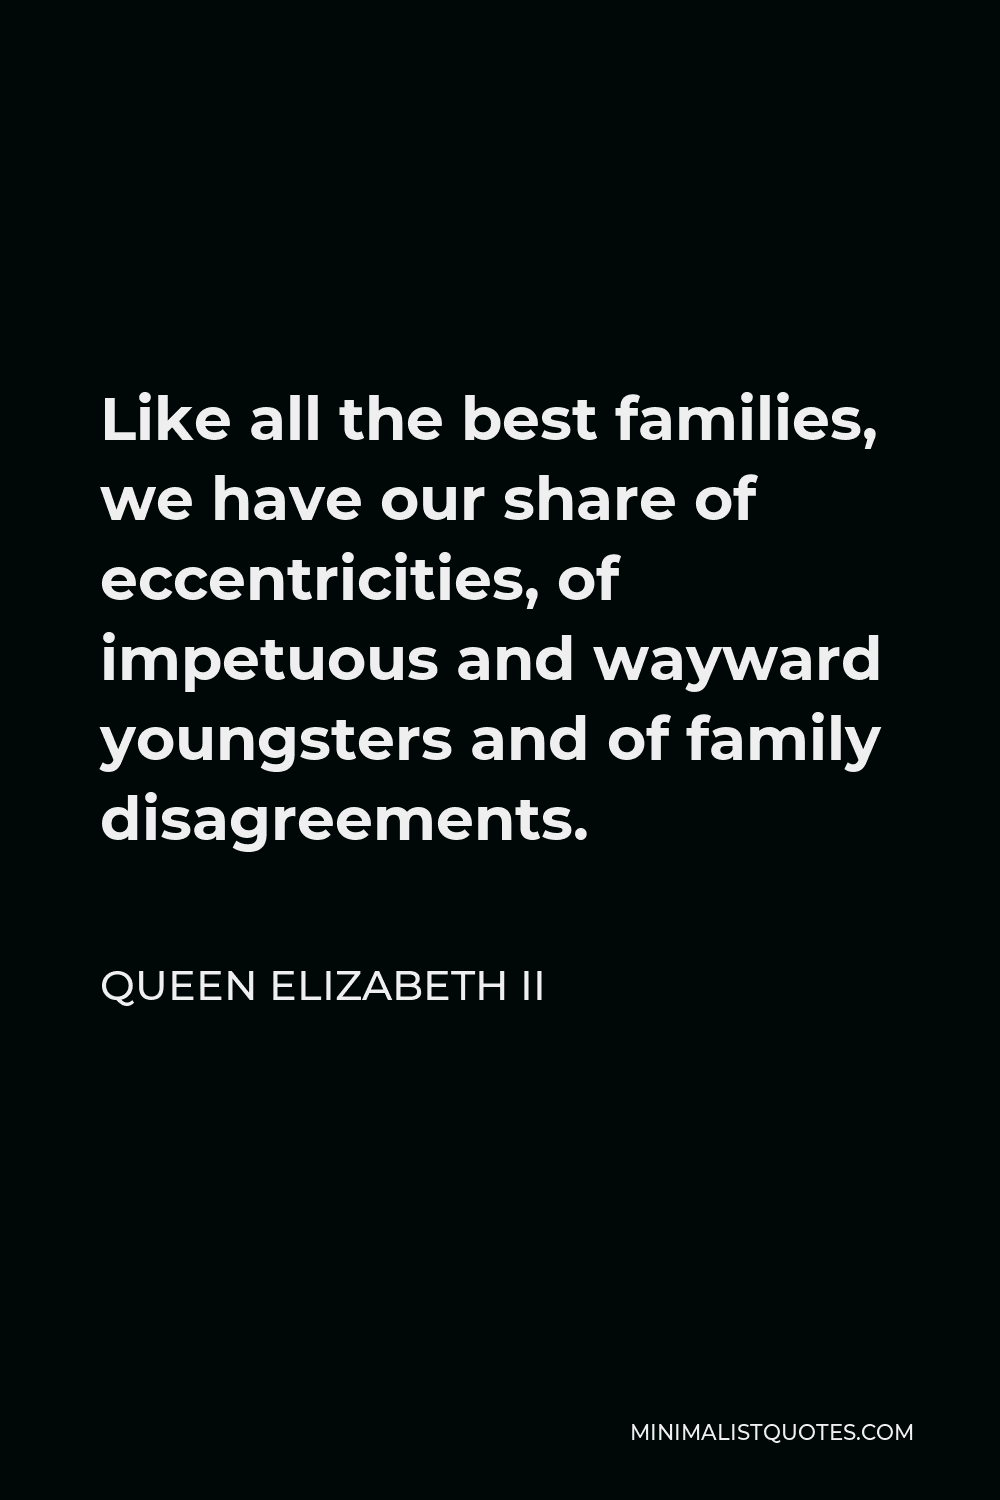 Queen Elizabeth II Quote - Like all the best families, we have our share of eccentricities, of impetuous and wayward youngsters and of family disagreements.